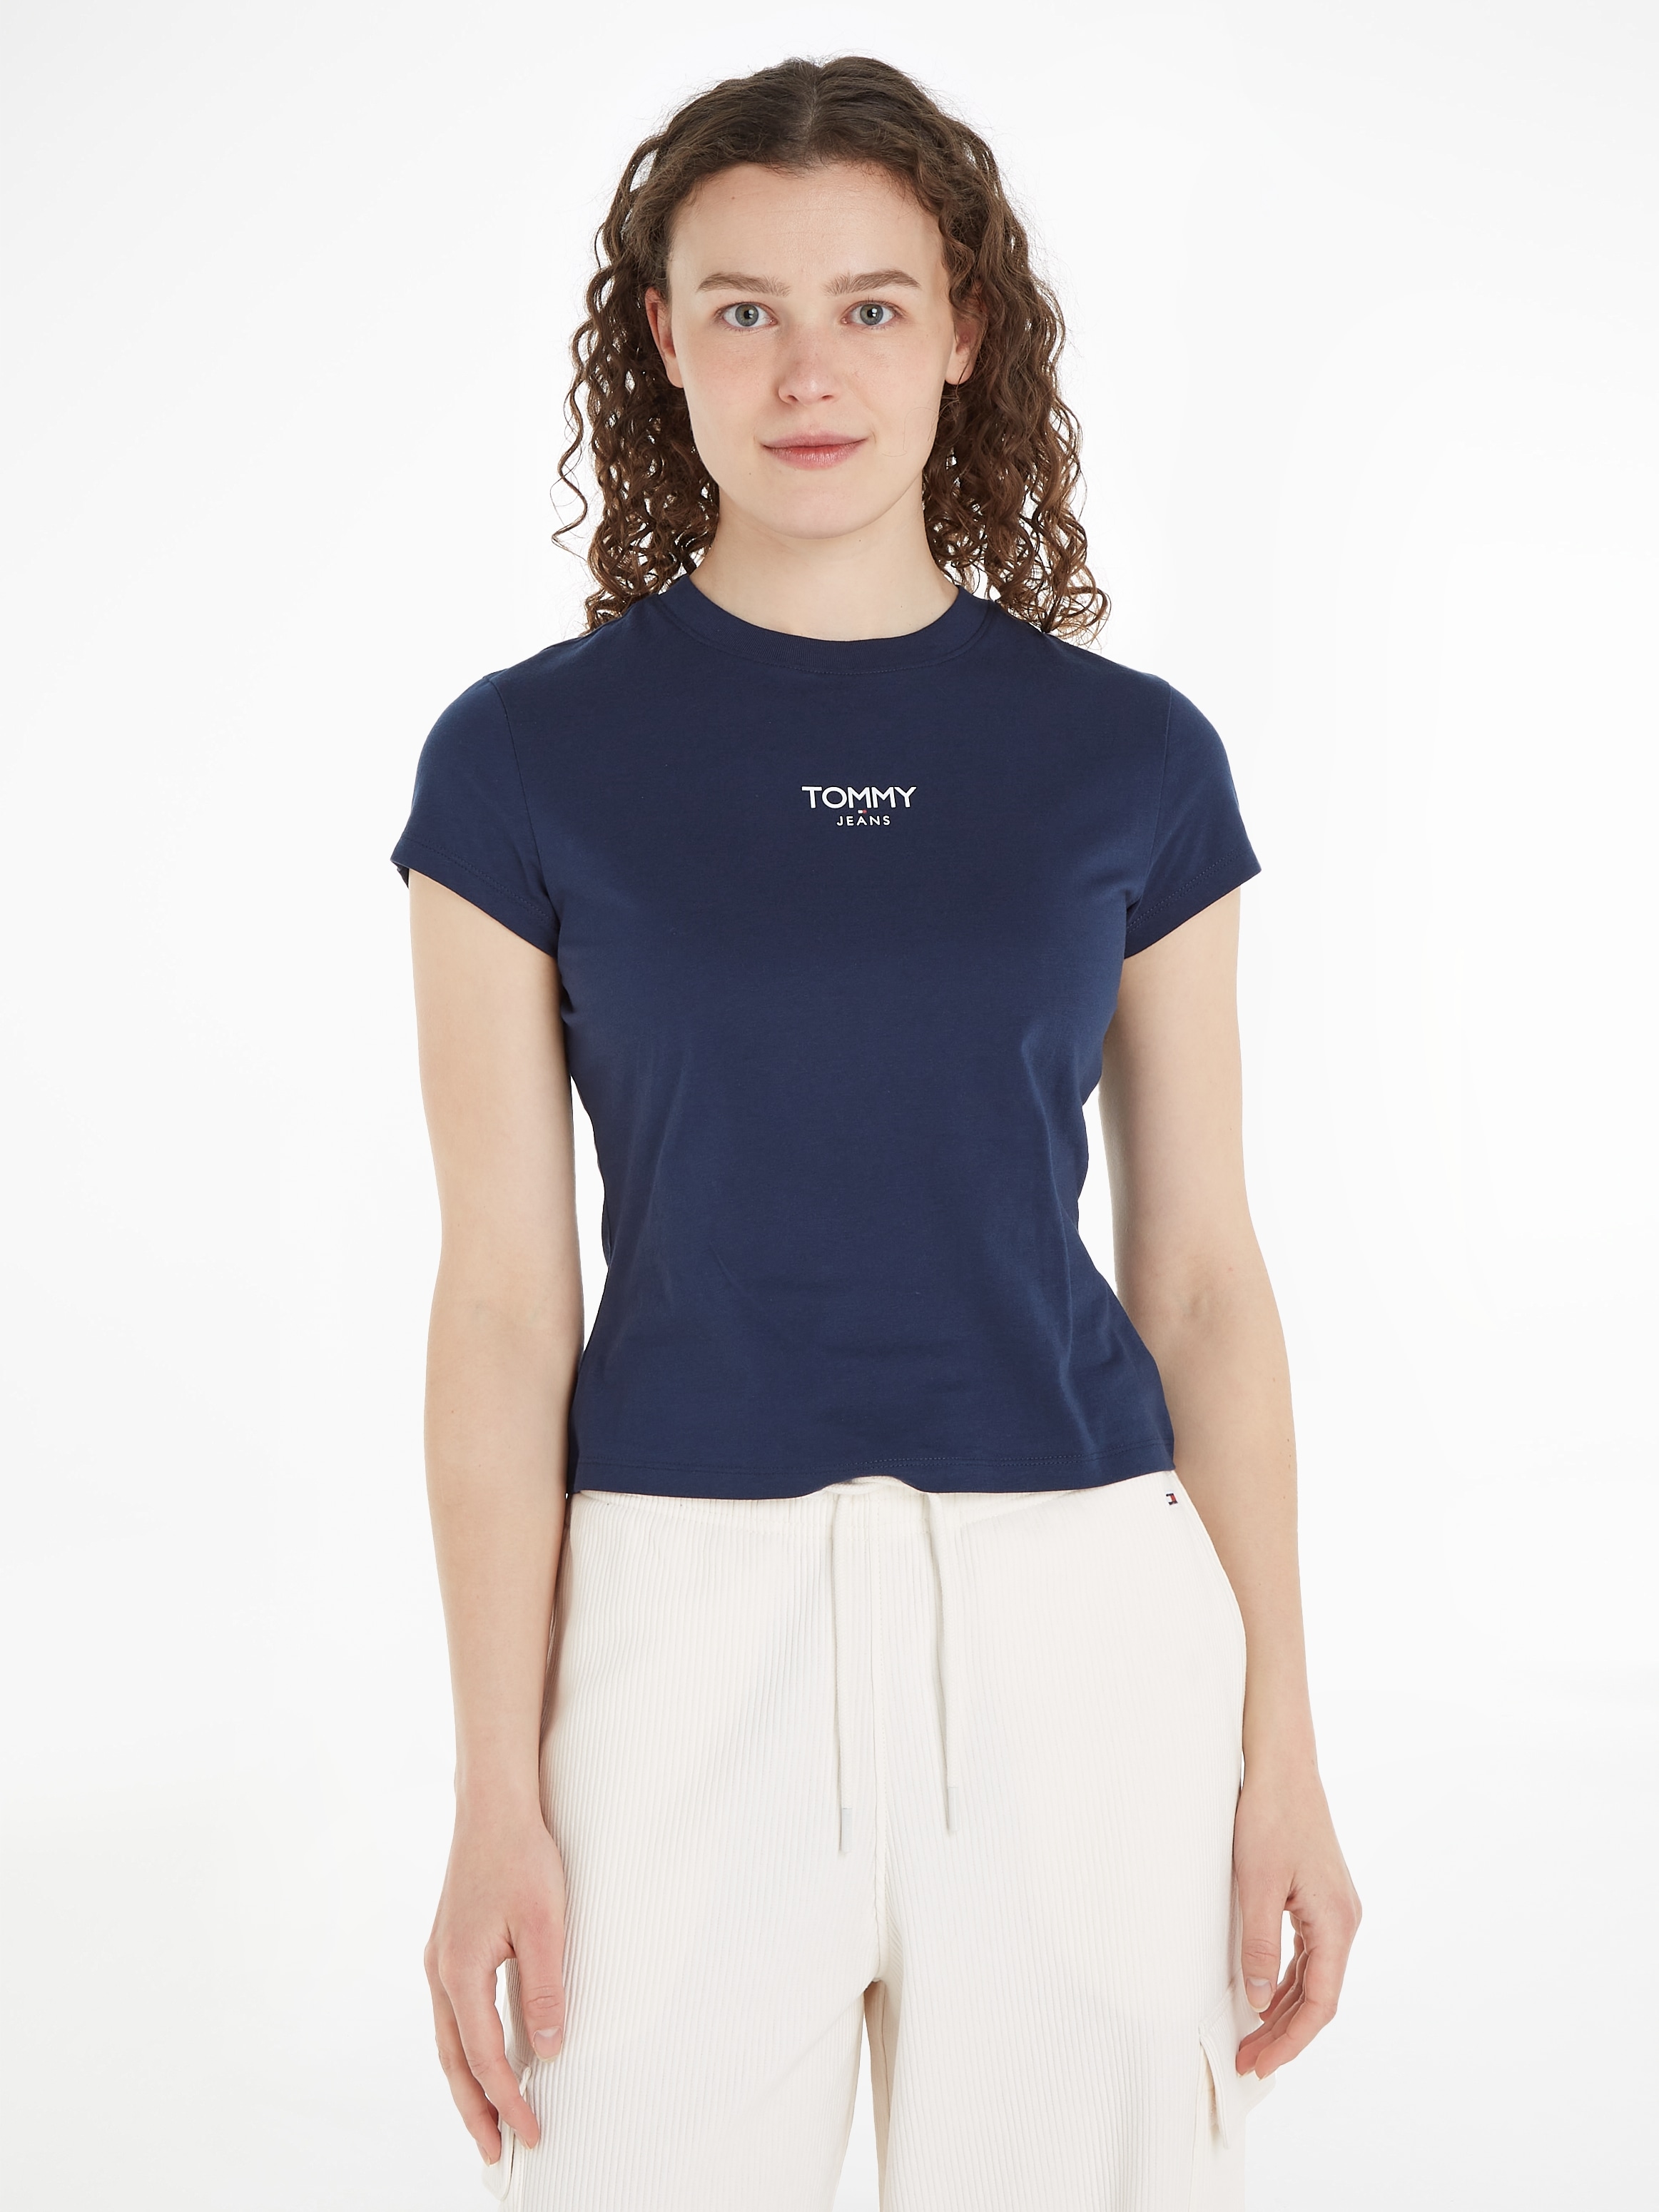 Tommy 1 Tommy bei OTTOversand ESSENTIAL BBY mit T-Shirt SS«, Logo »TJW LOGO Jeans Jeans